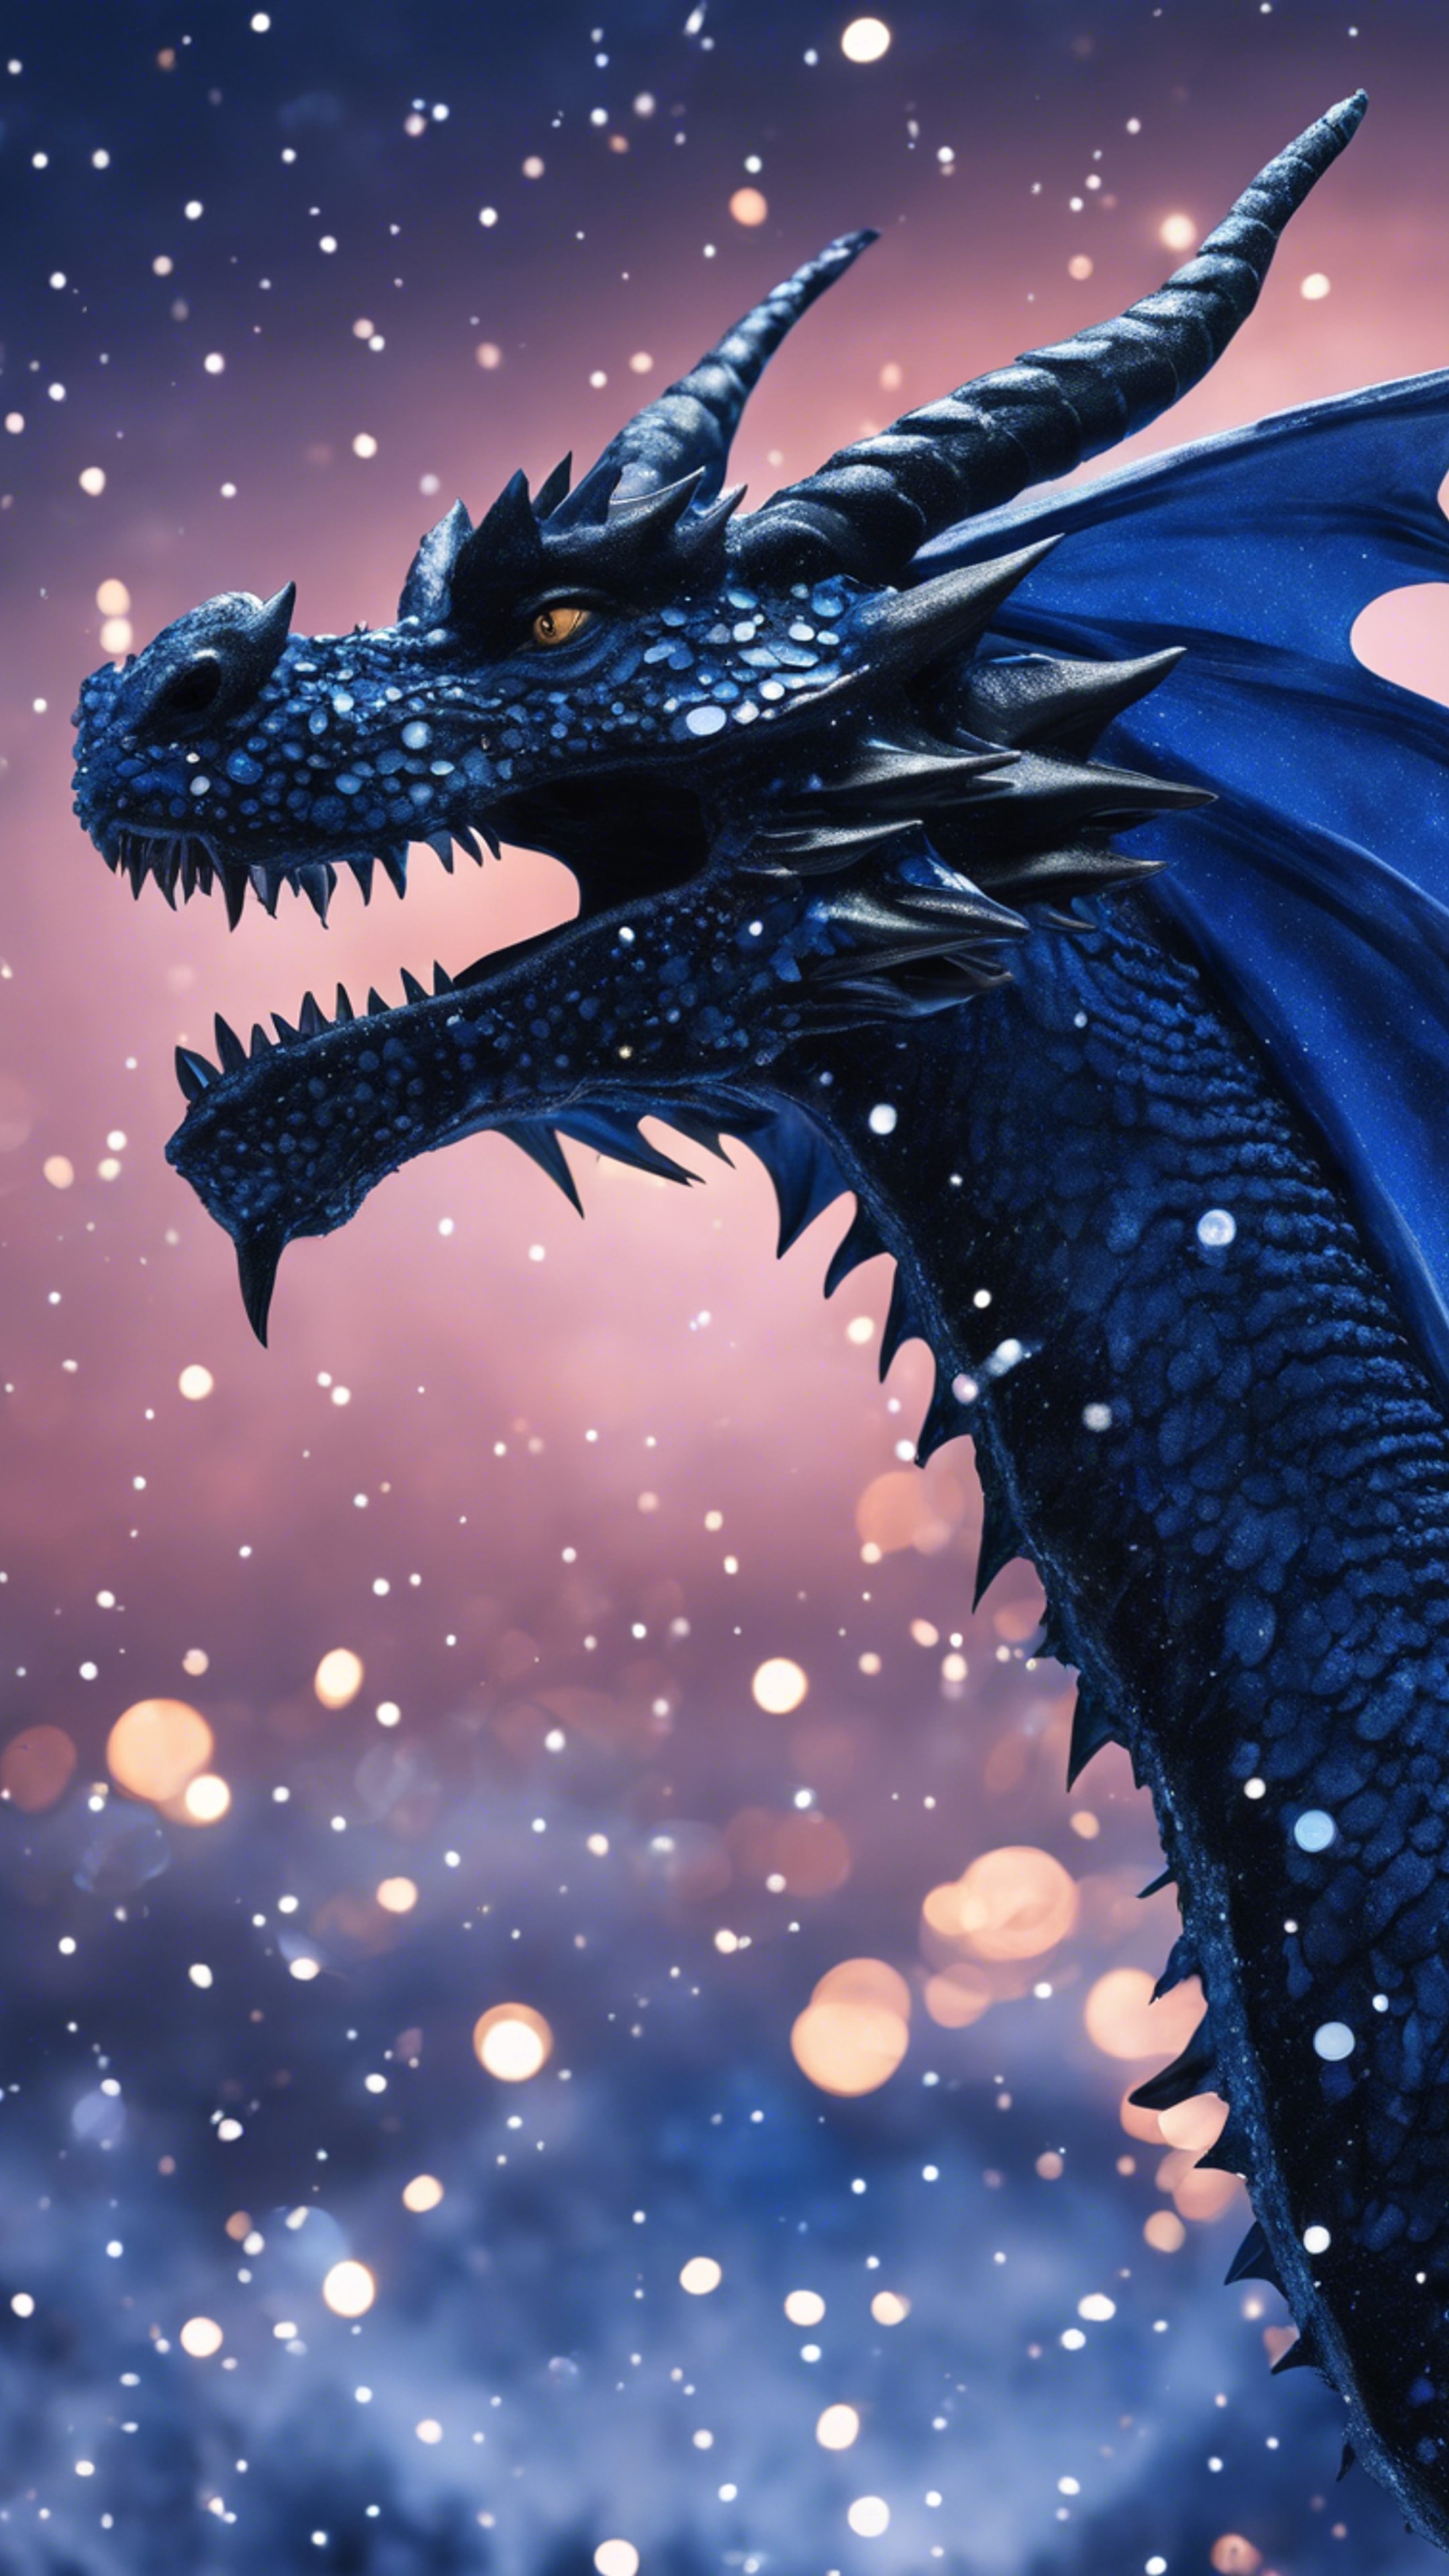 A strikingly cool deep blue dragon breathing black ice against a twilight sky dotted with shimmering stars. Wallpaper[7d438eb4c59045c39bc2]